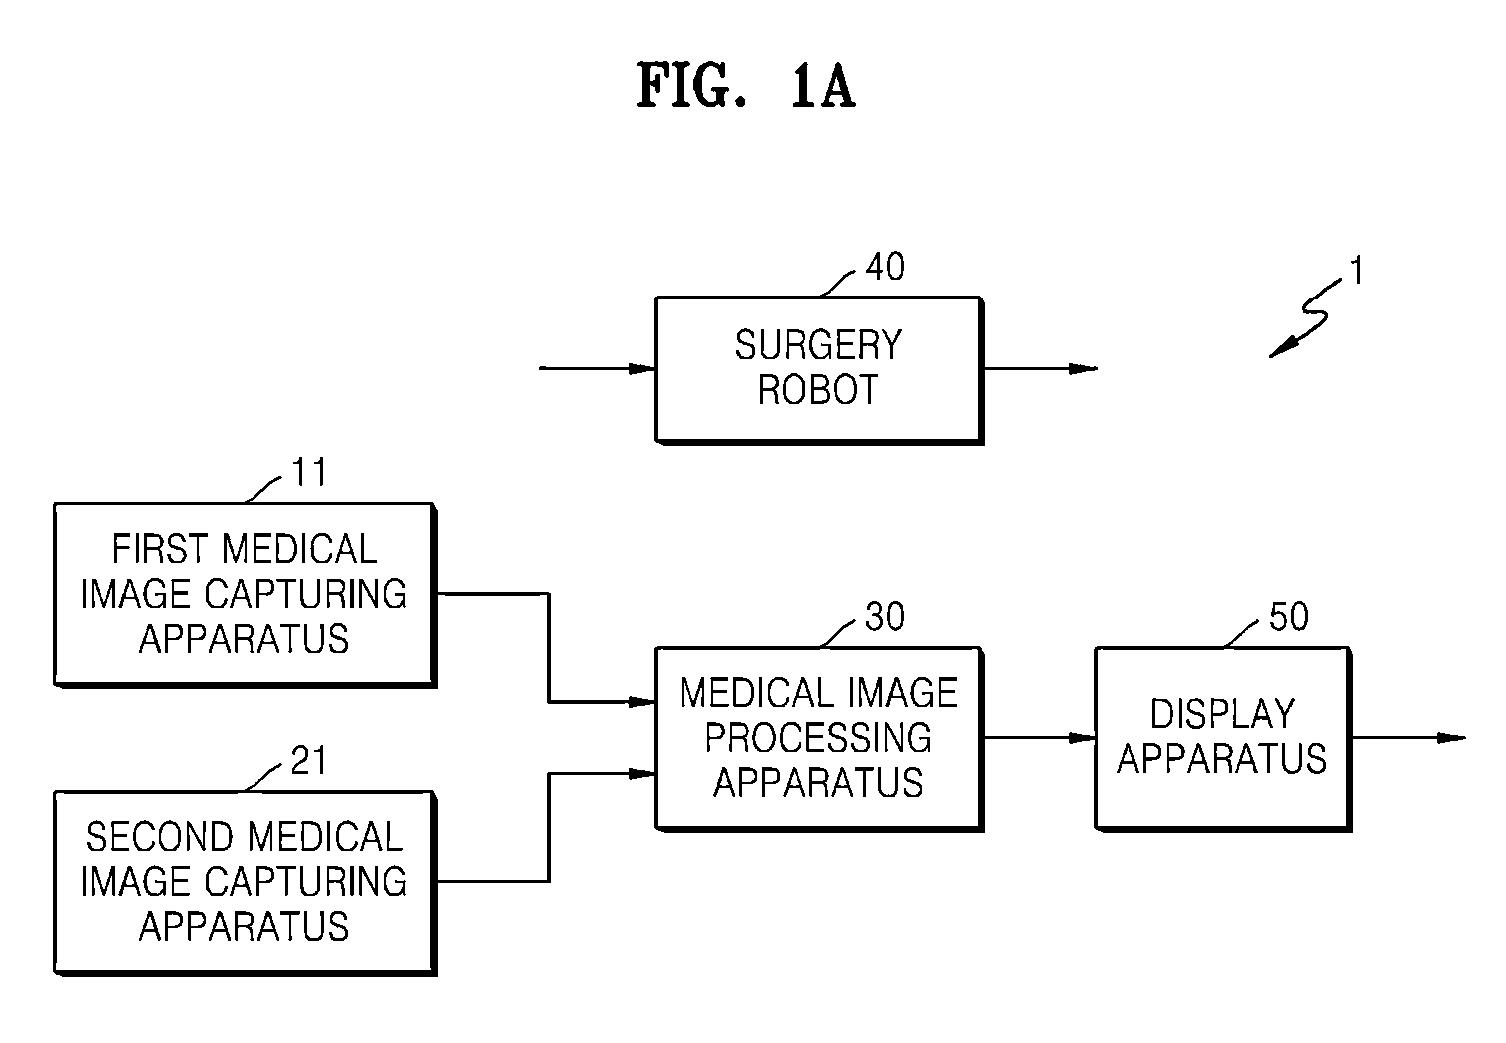 Method and apparatus for processing medical image, and robotic surgery system using image guidance